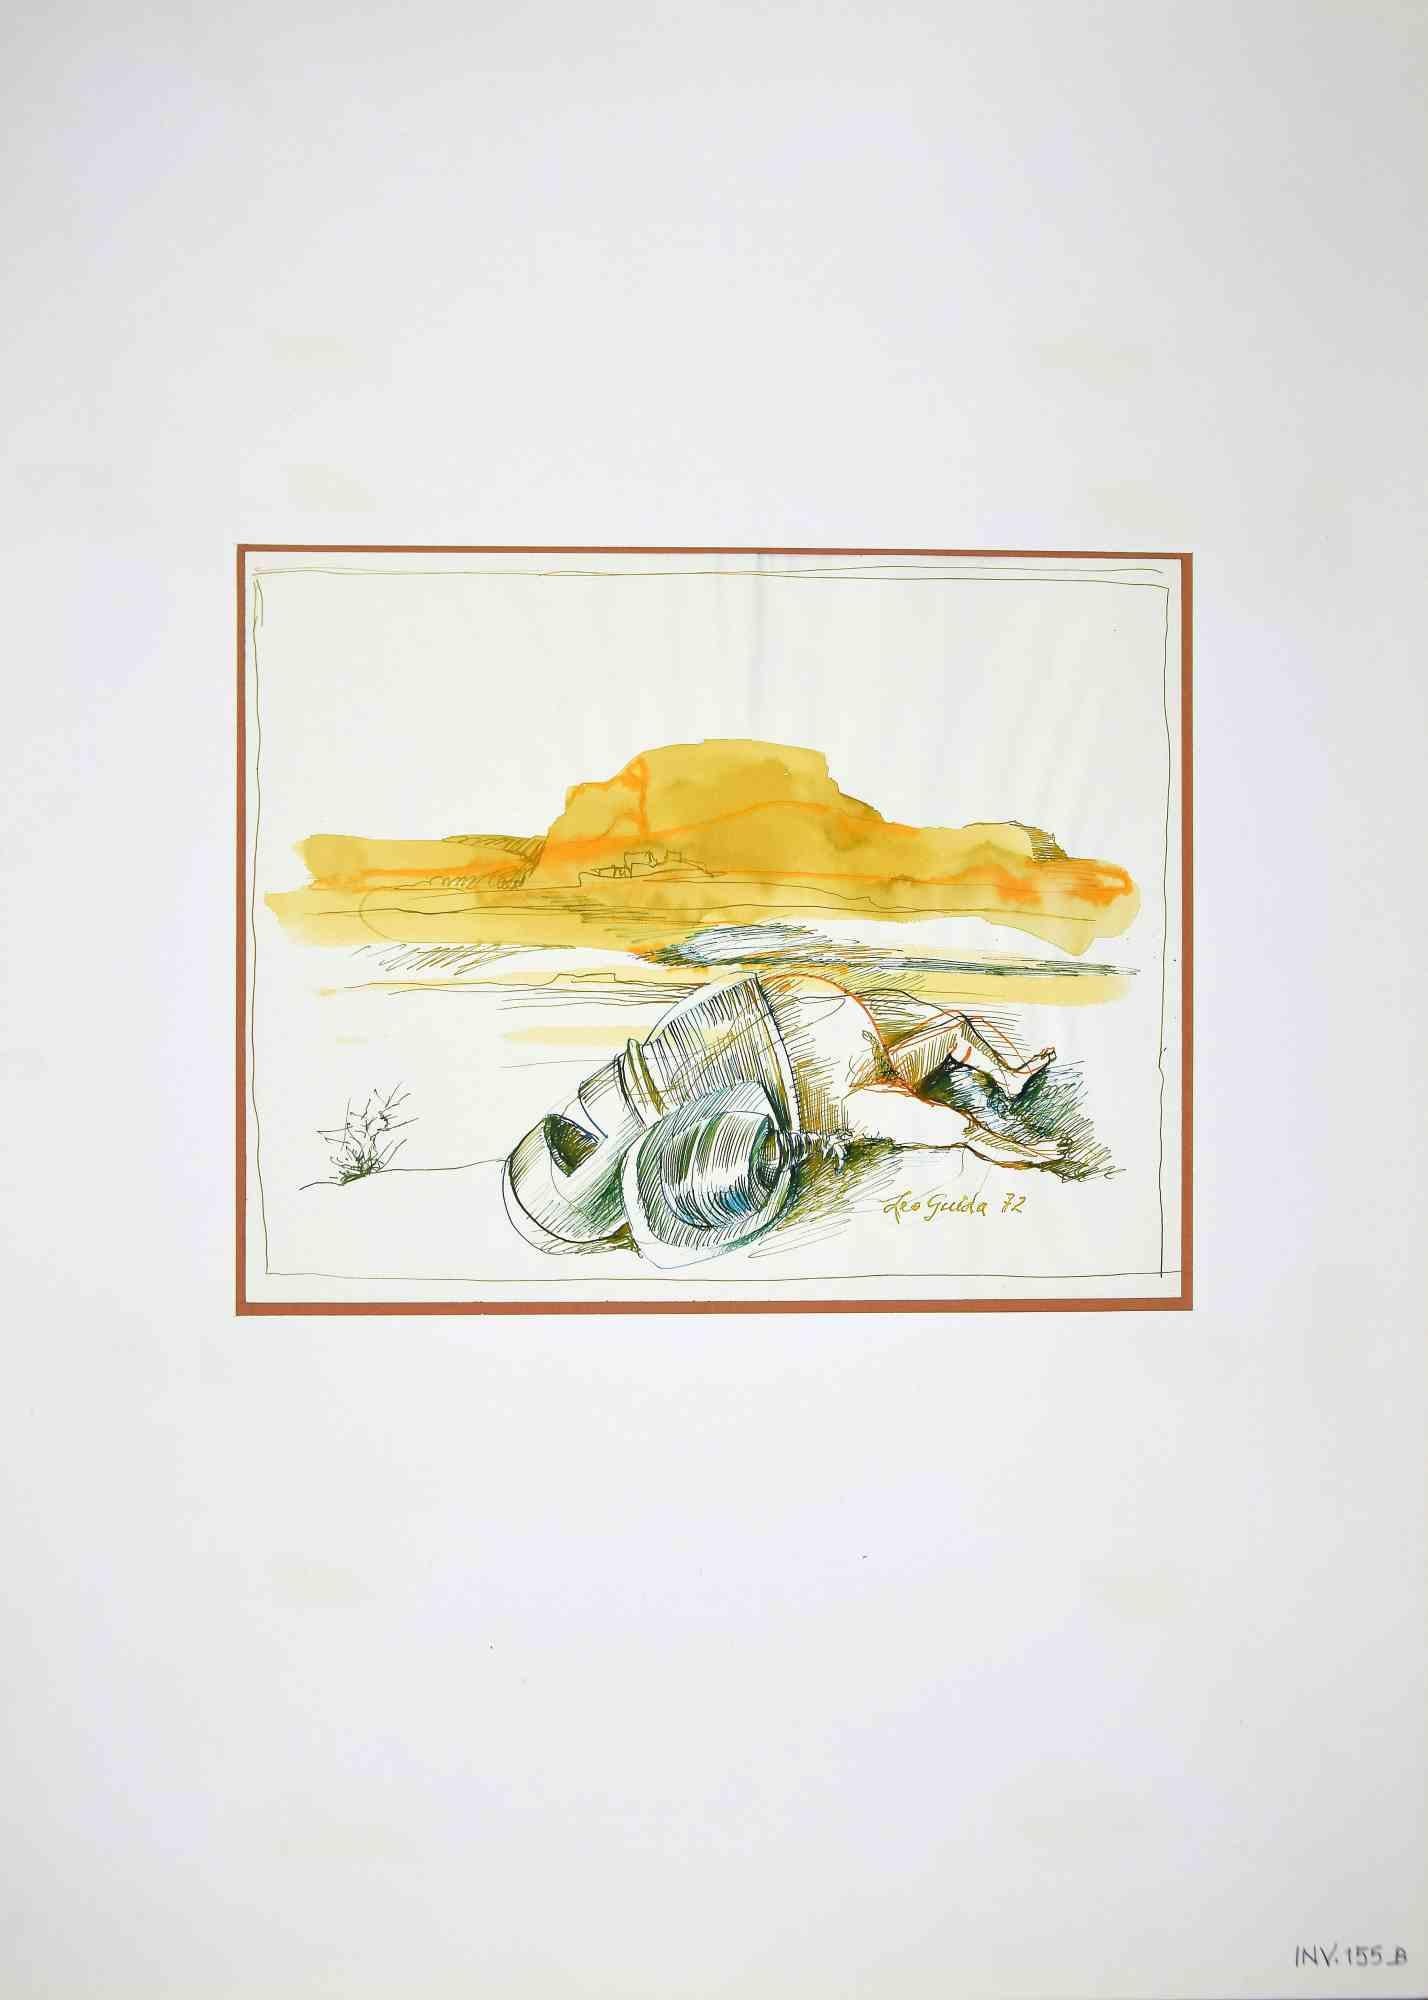 The Fall of the Knight is an original artwork realized in the 1970s by the Italian Contemporary artist  Leo Guida  (1992 - 2017).

Original ink and watercolor on paper.

Good conditions.

Hand-signed.

The artwork is depicted through soft strokes in